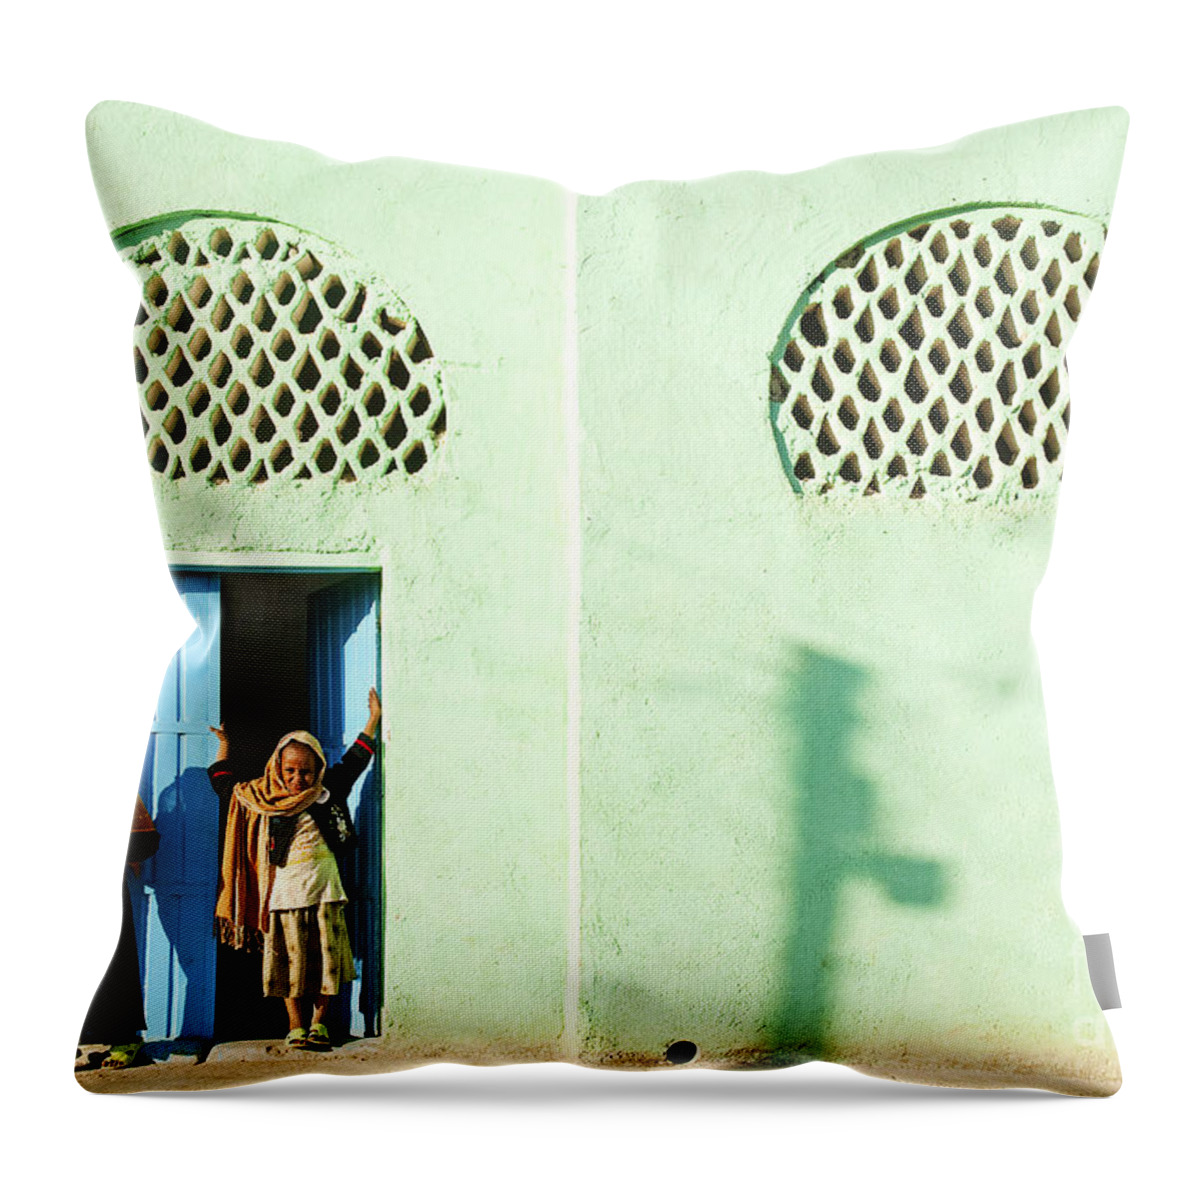 Harar Throw Pillow featuring the photograph Veiled Girls By Mosque In Harar Ethiopia #1 by JM Travel Photography